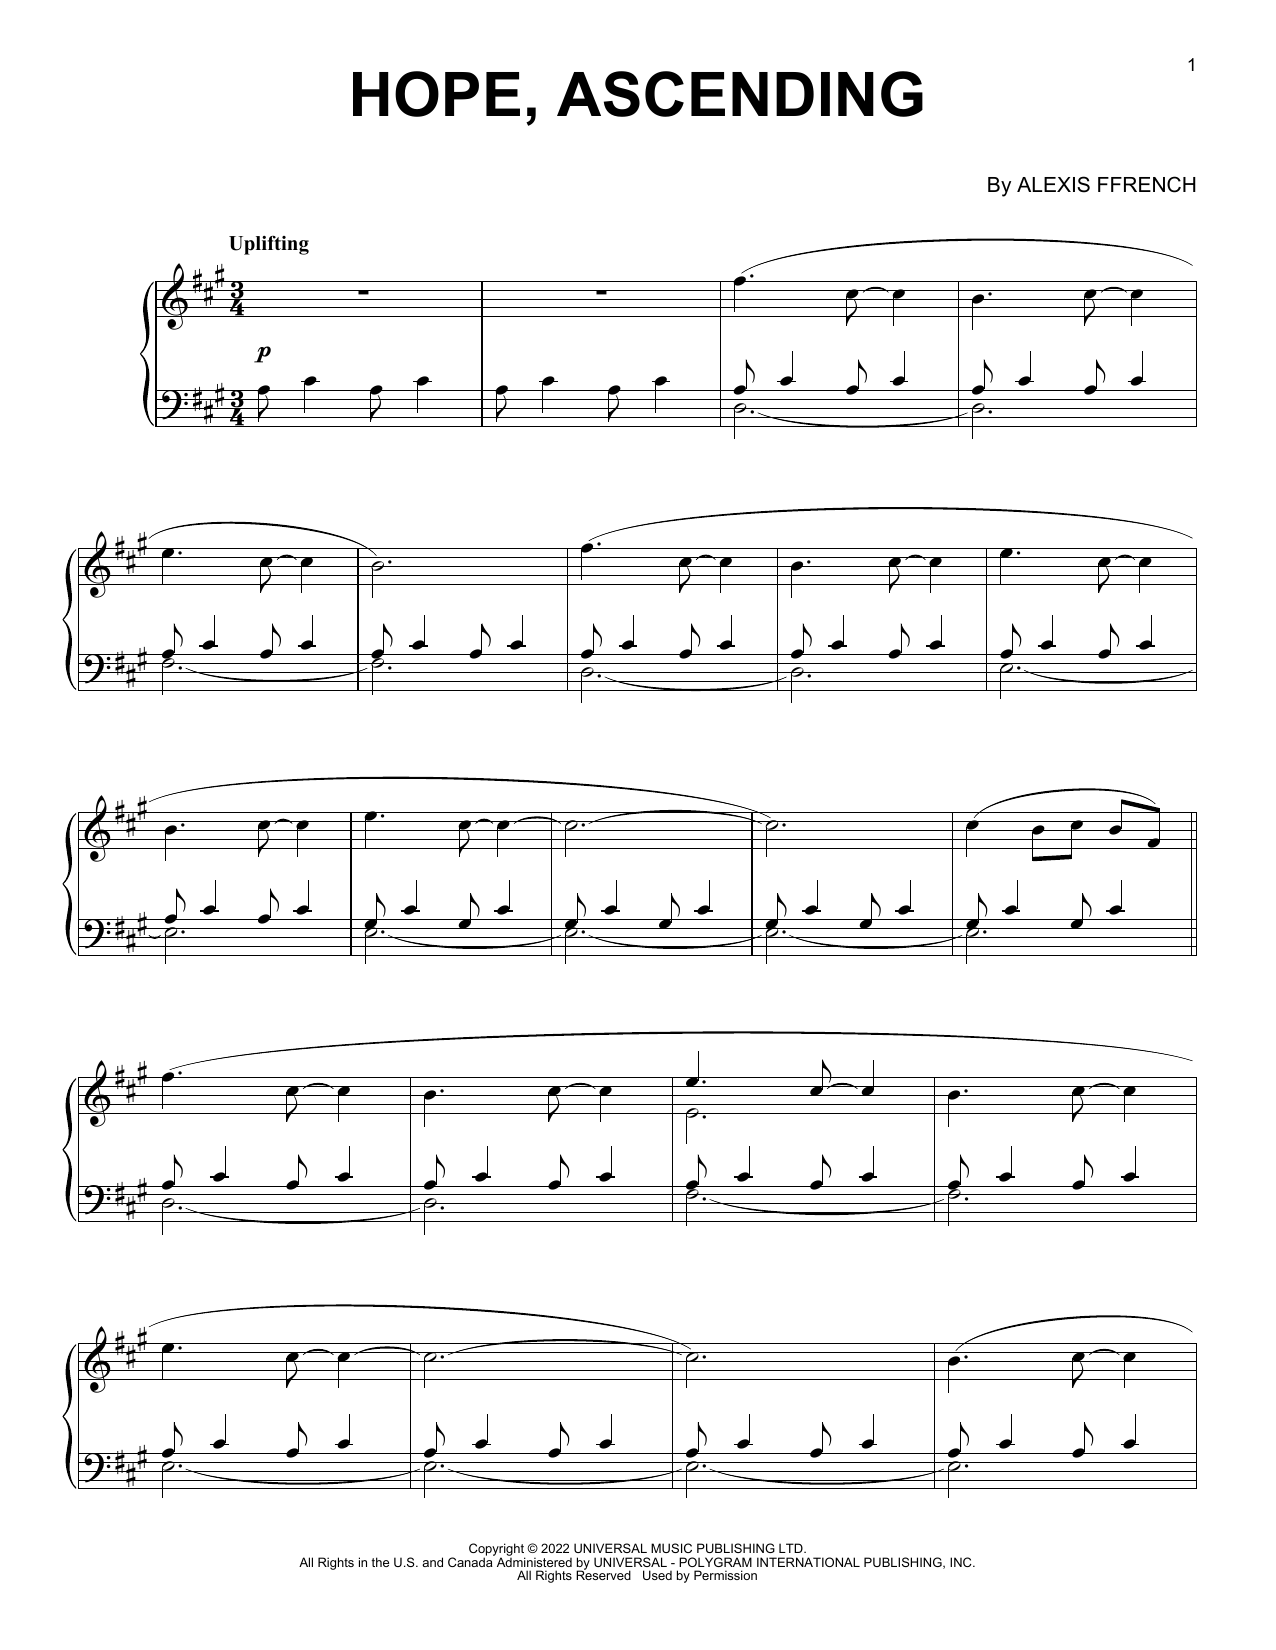 Download Alexis Ffrench Hope, Ascending Sheet Music